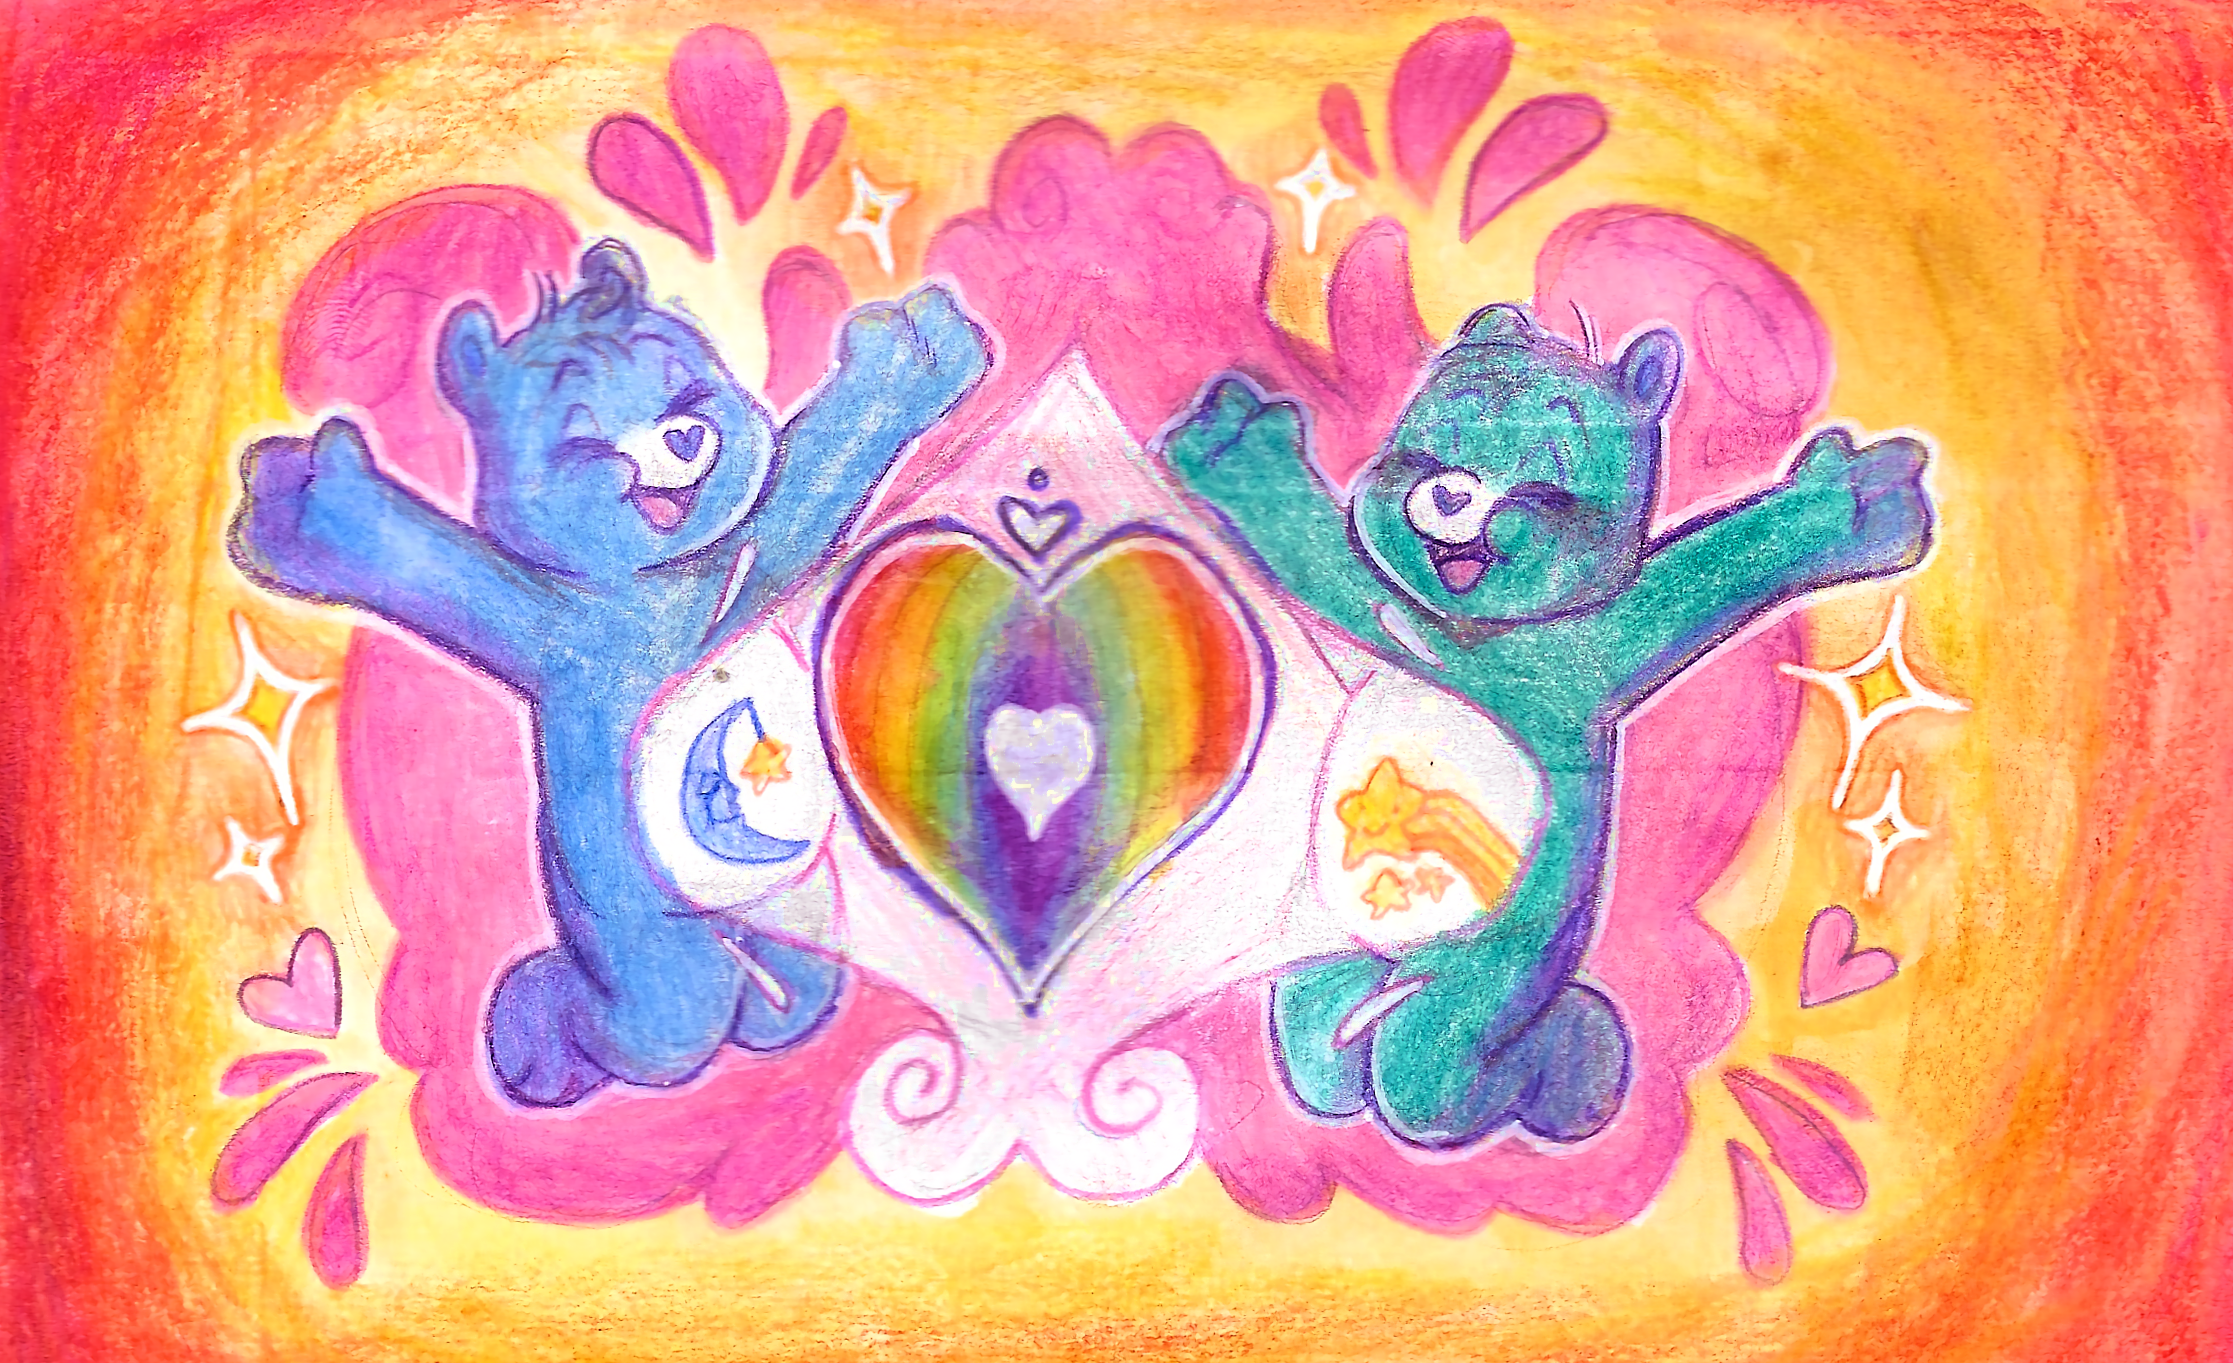 Wish and Bedtime Bear doing a Care Bear Stare to make a Rainbow Heart